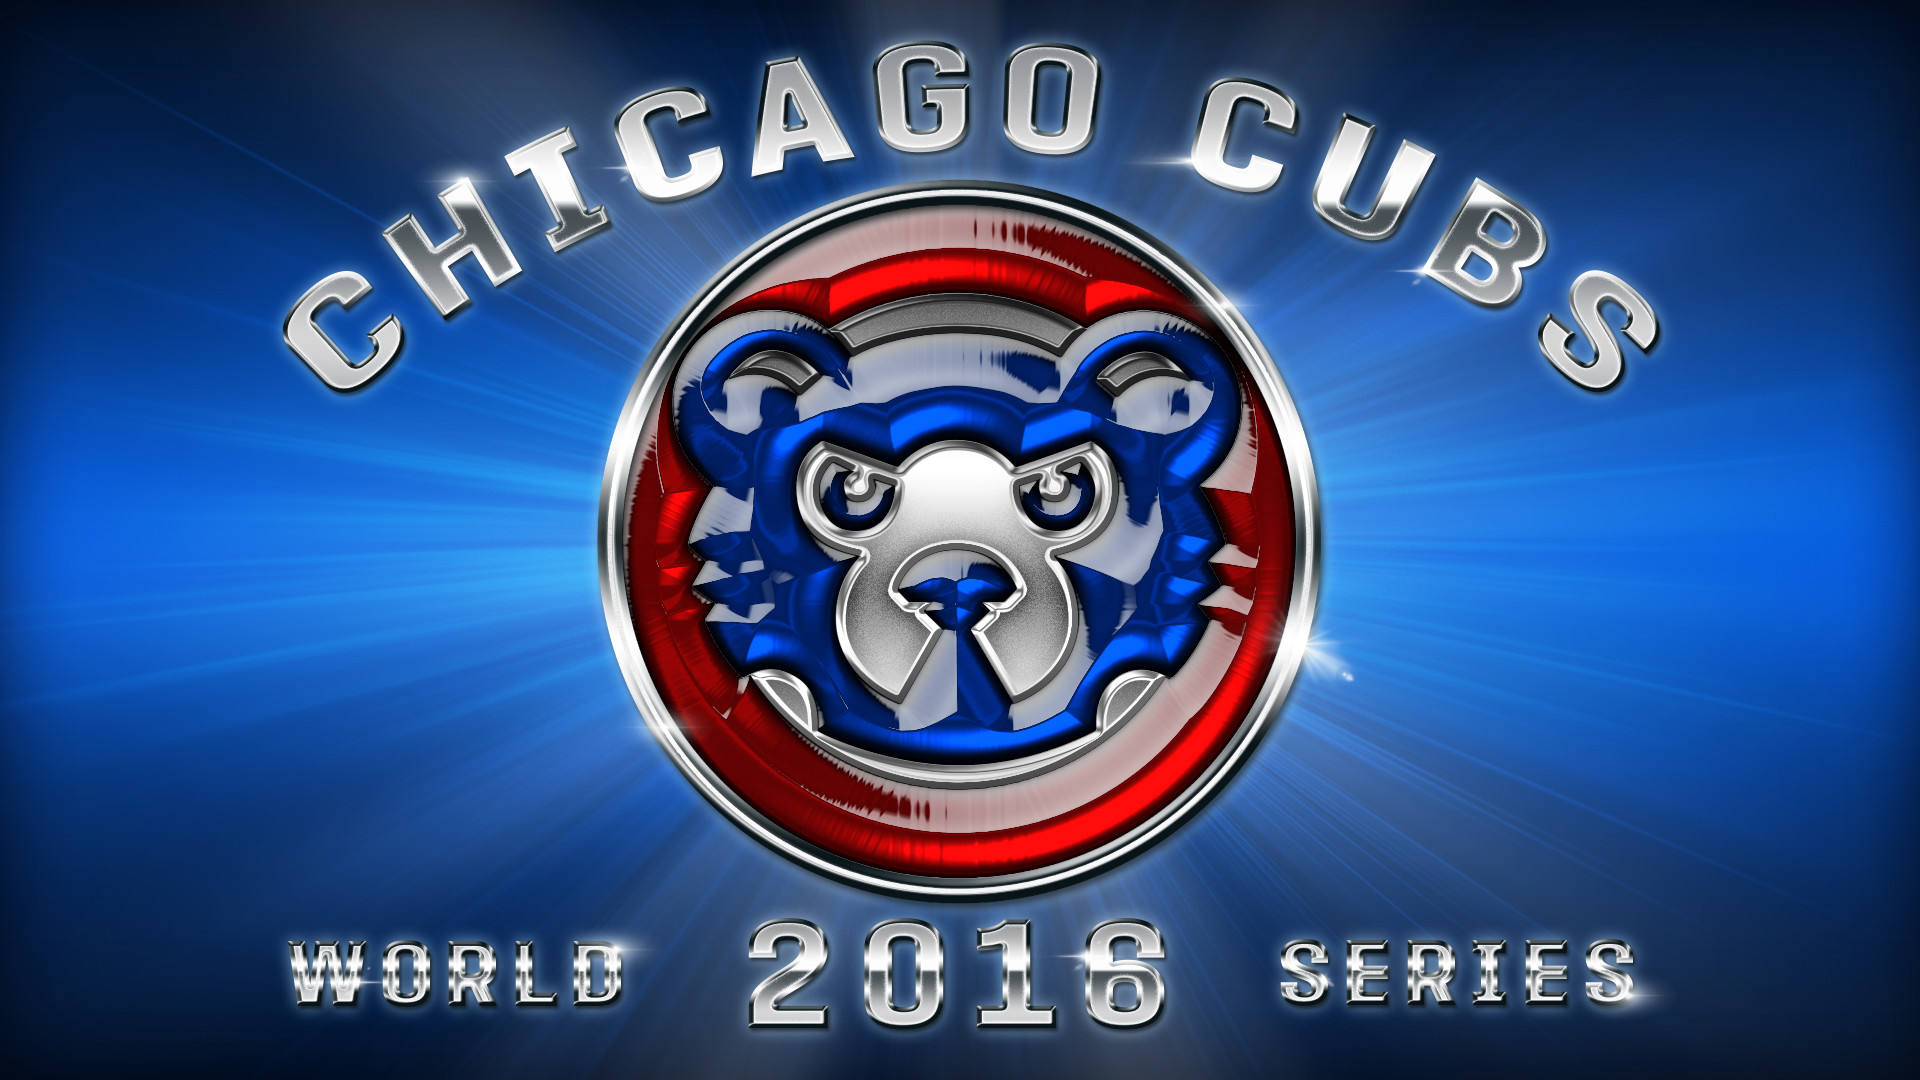 Best Chicago Cubs Wallpaper Logos Graphic VectoRealy